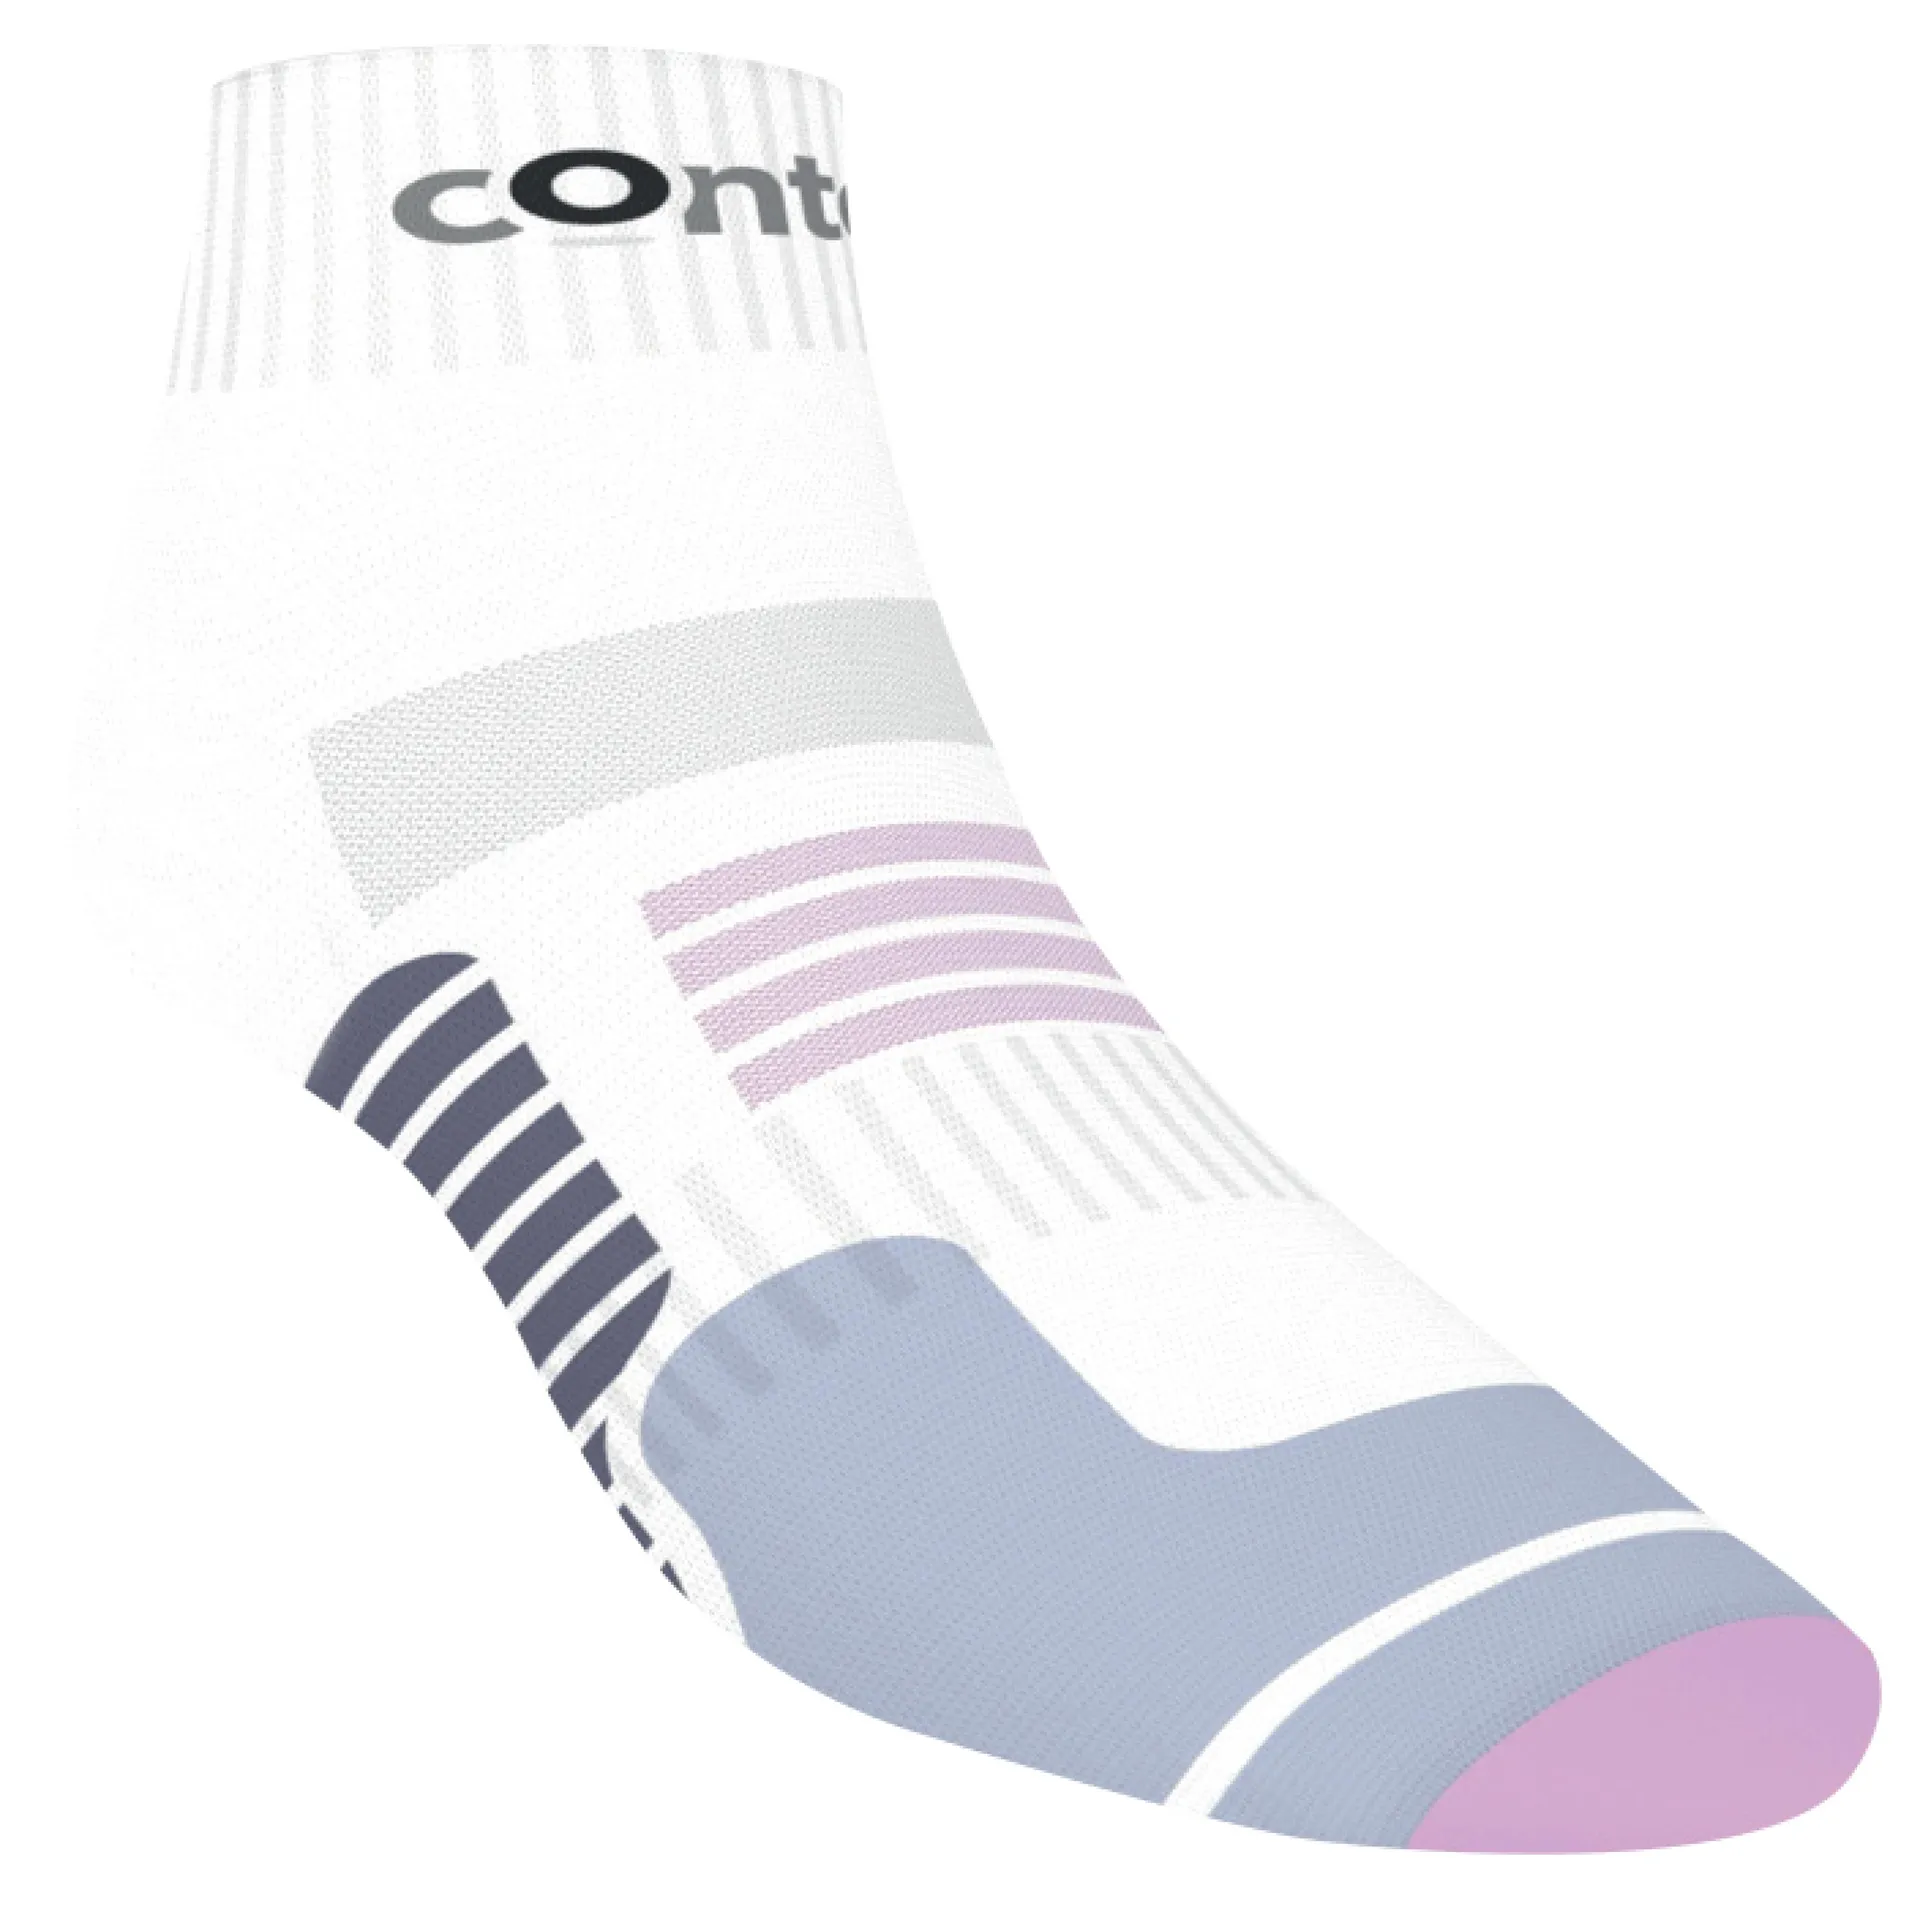 Contest Running Socks - Adult - White/Lilac